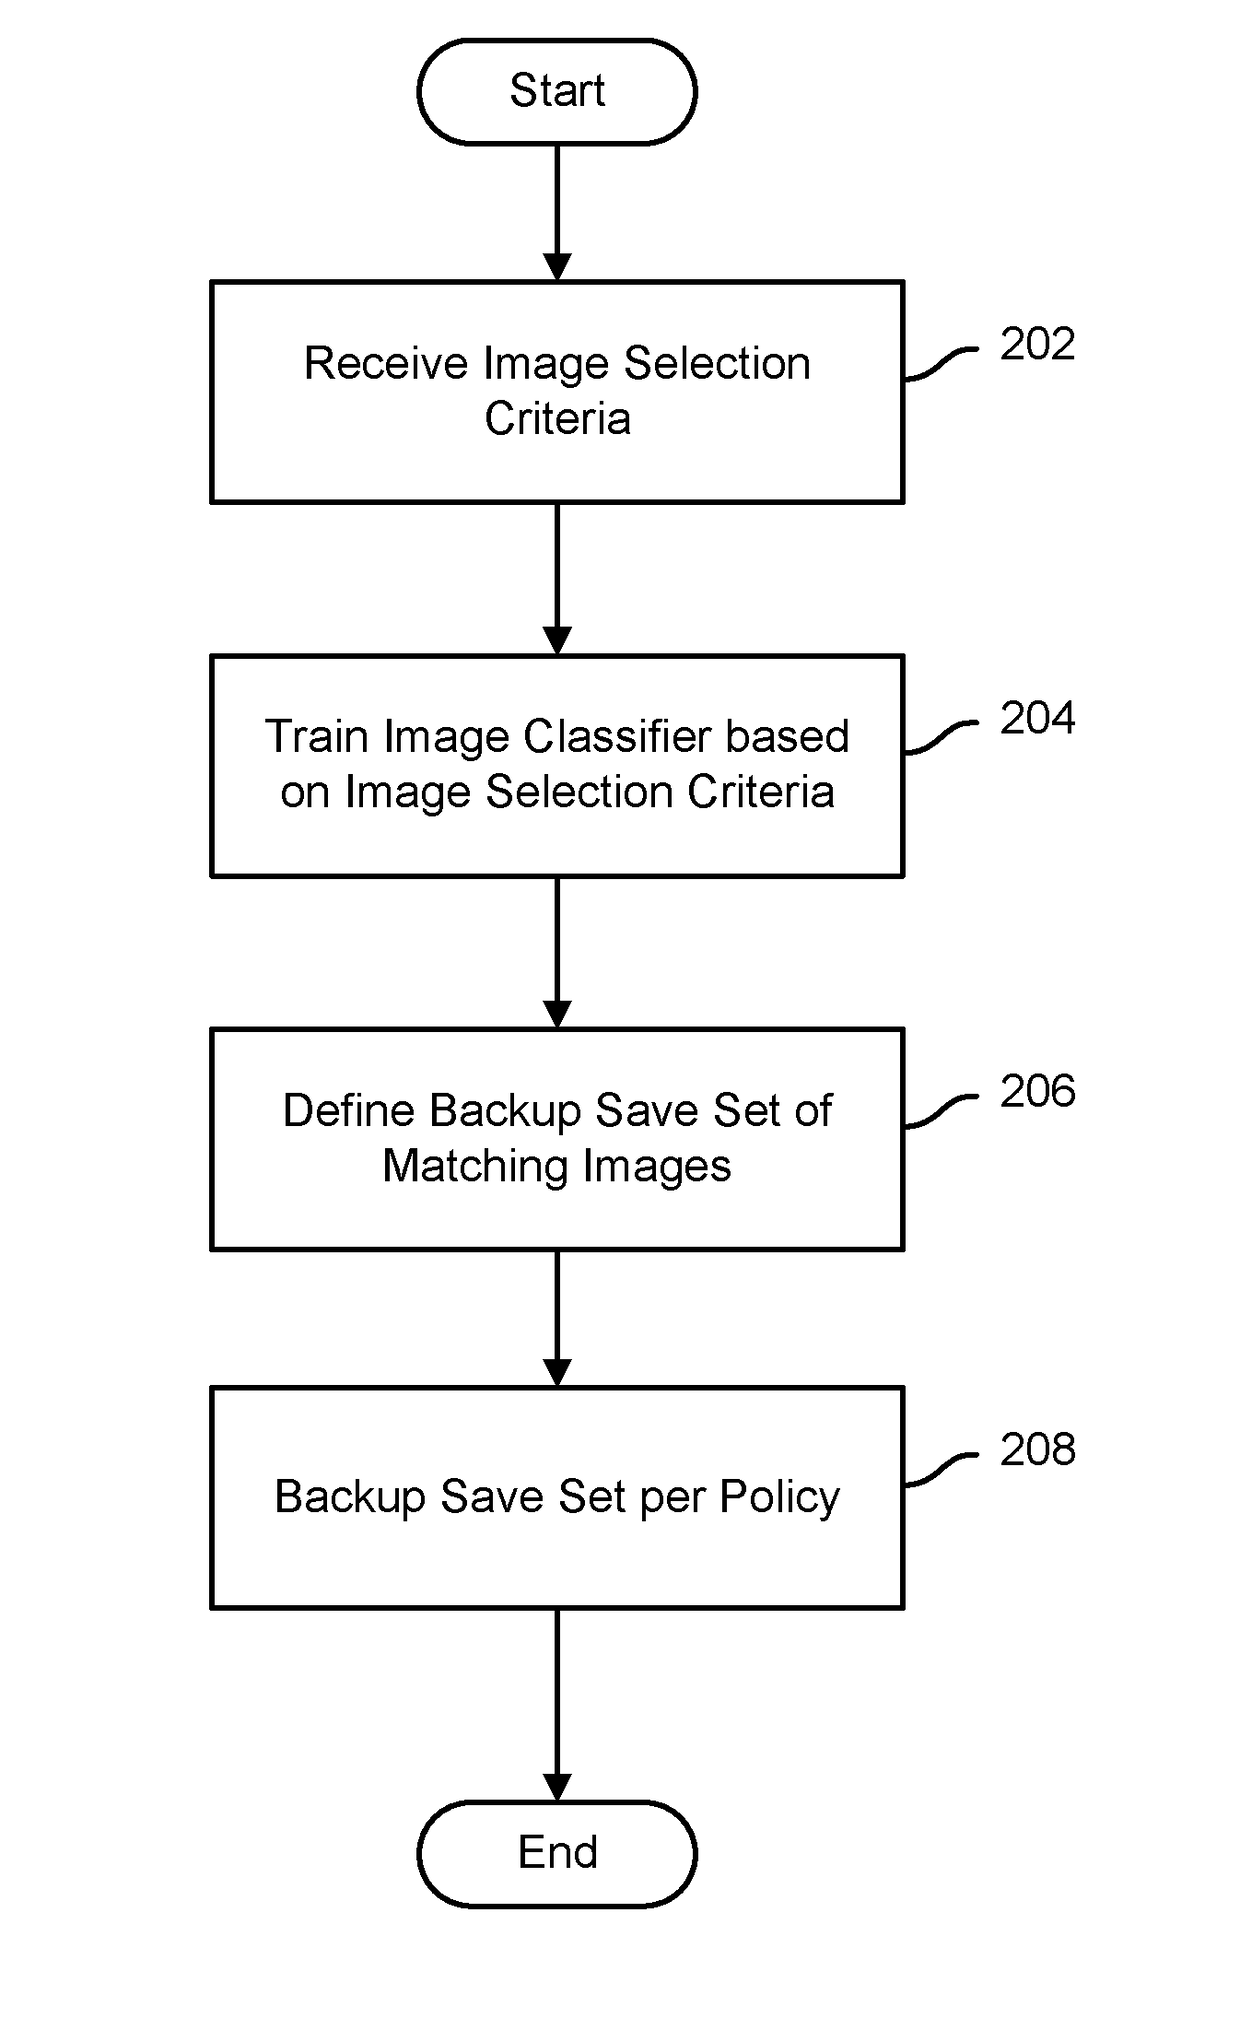 Selective image backup using trained image classifier